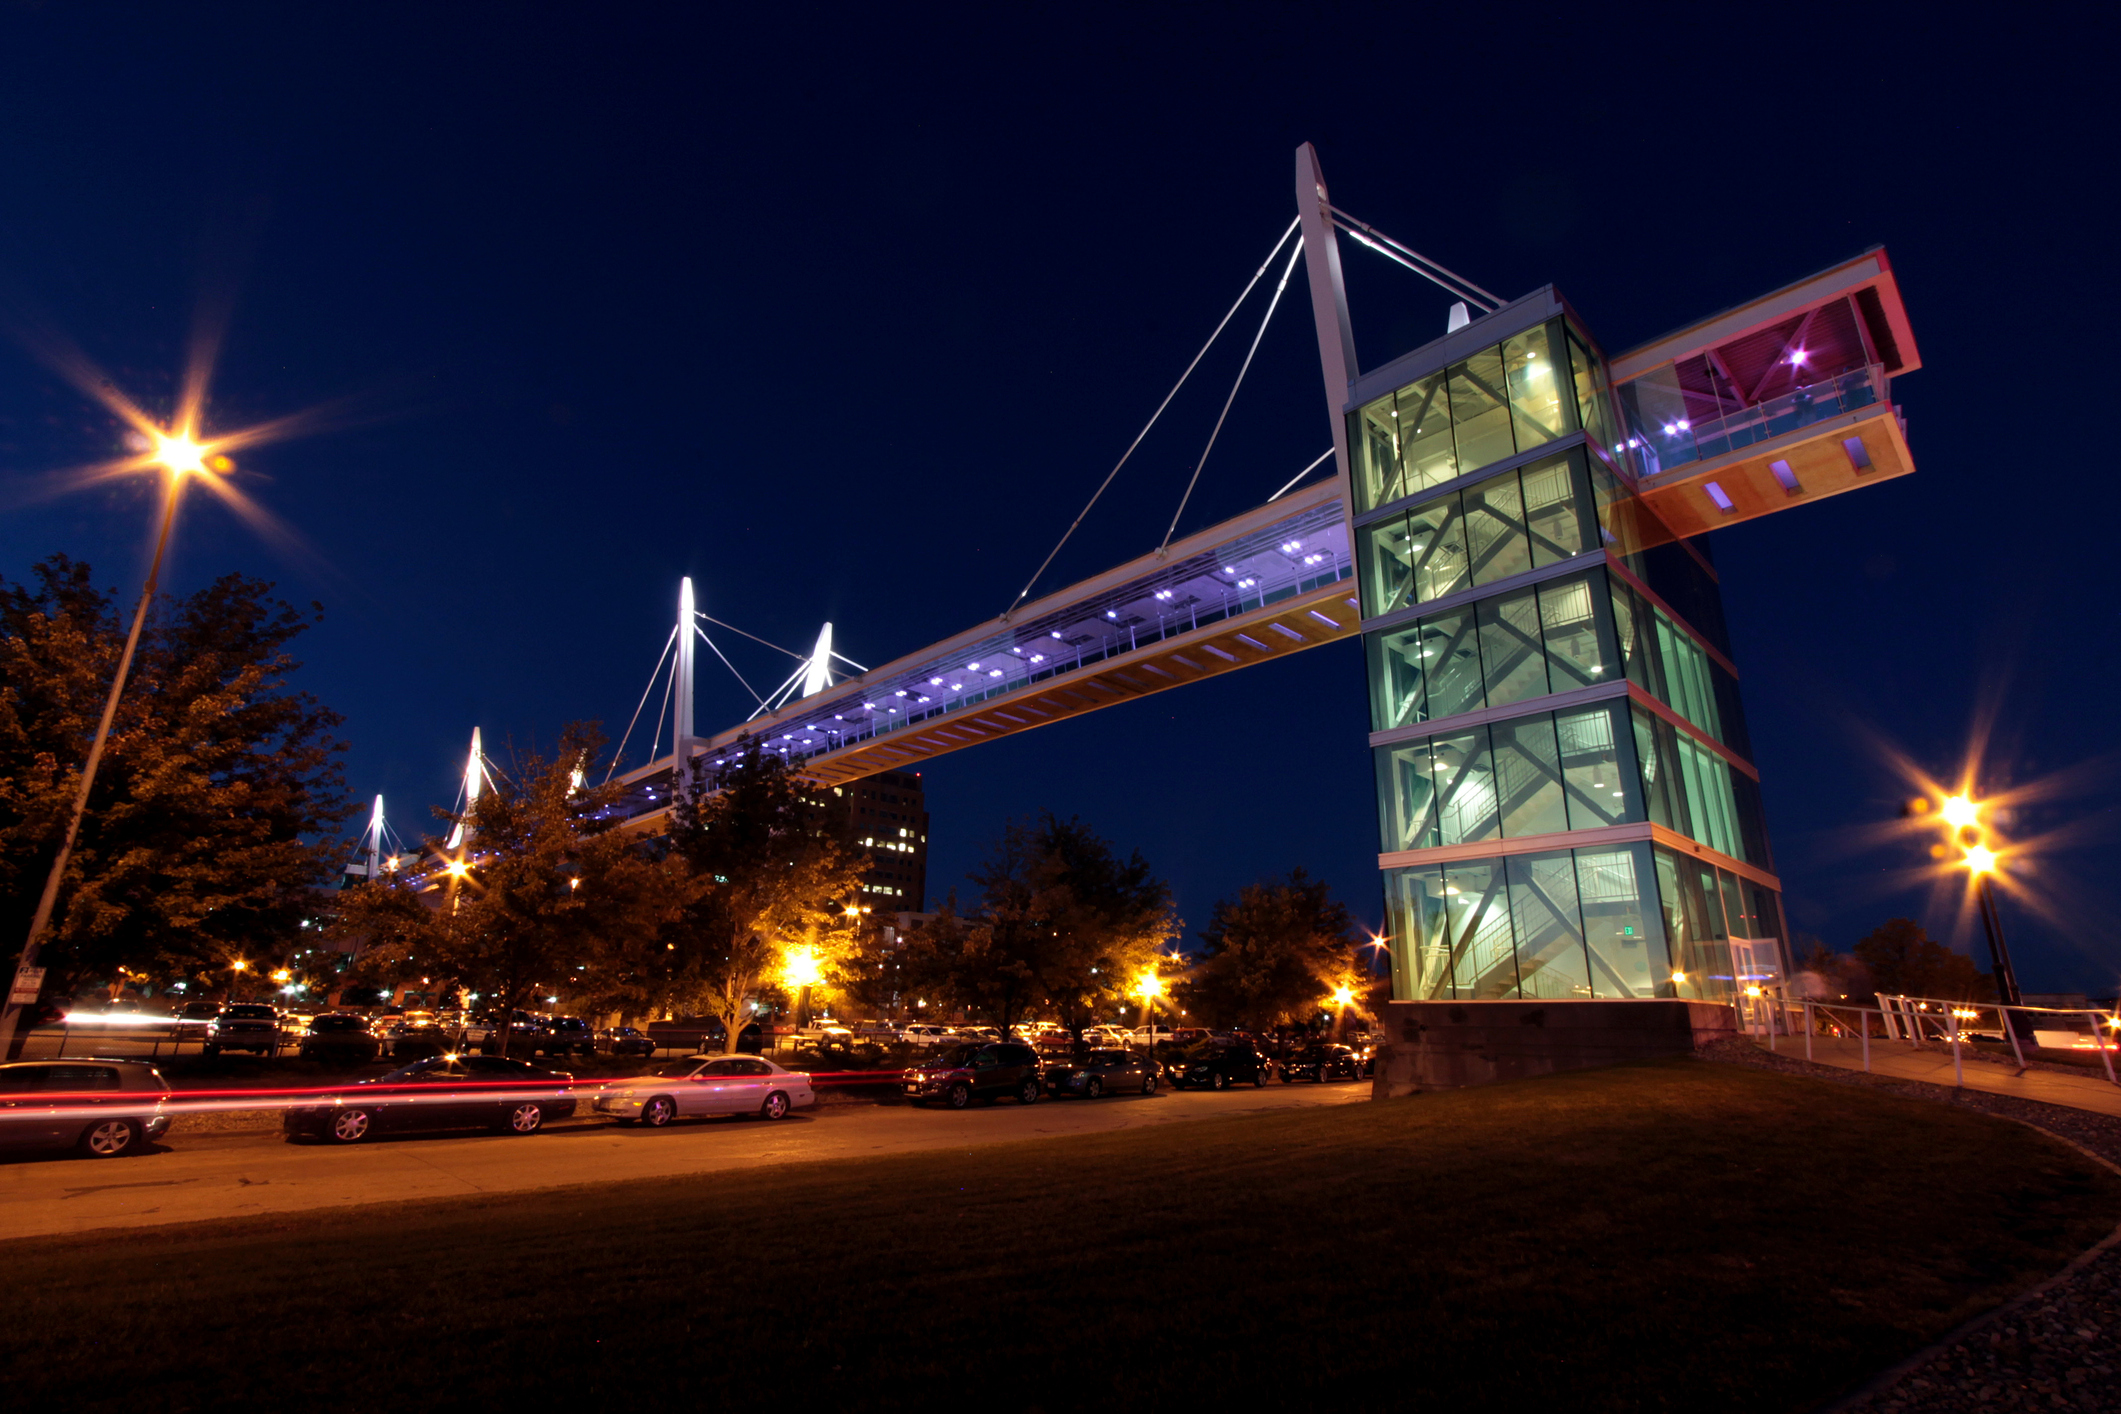 A night shot of an illuminated footbridge over a side river. 